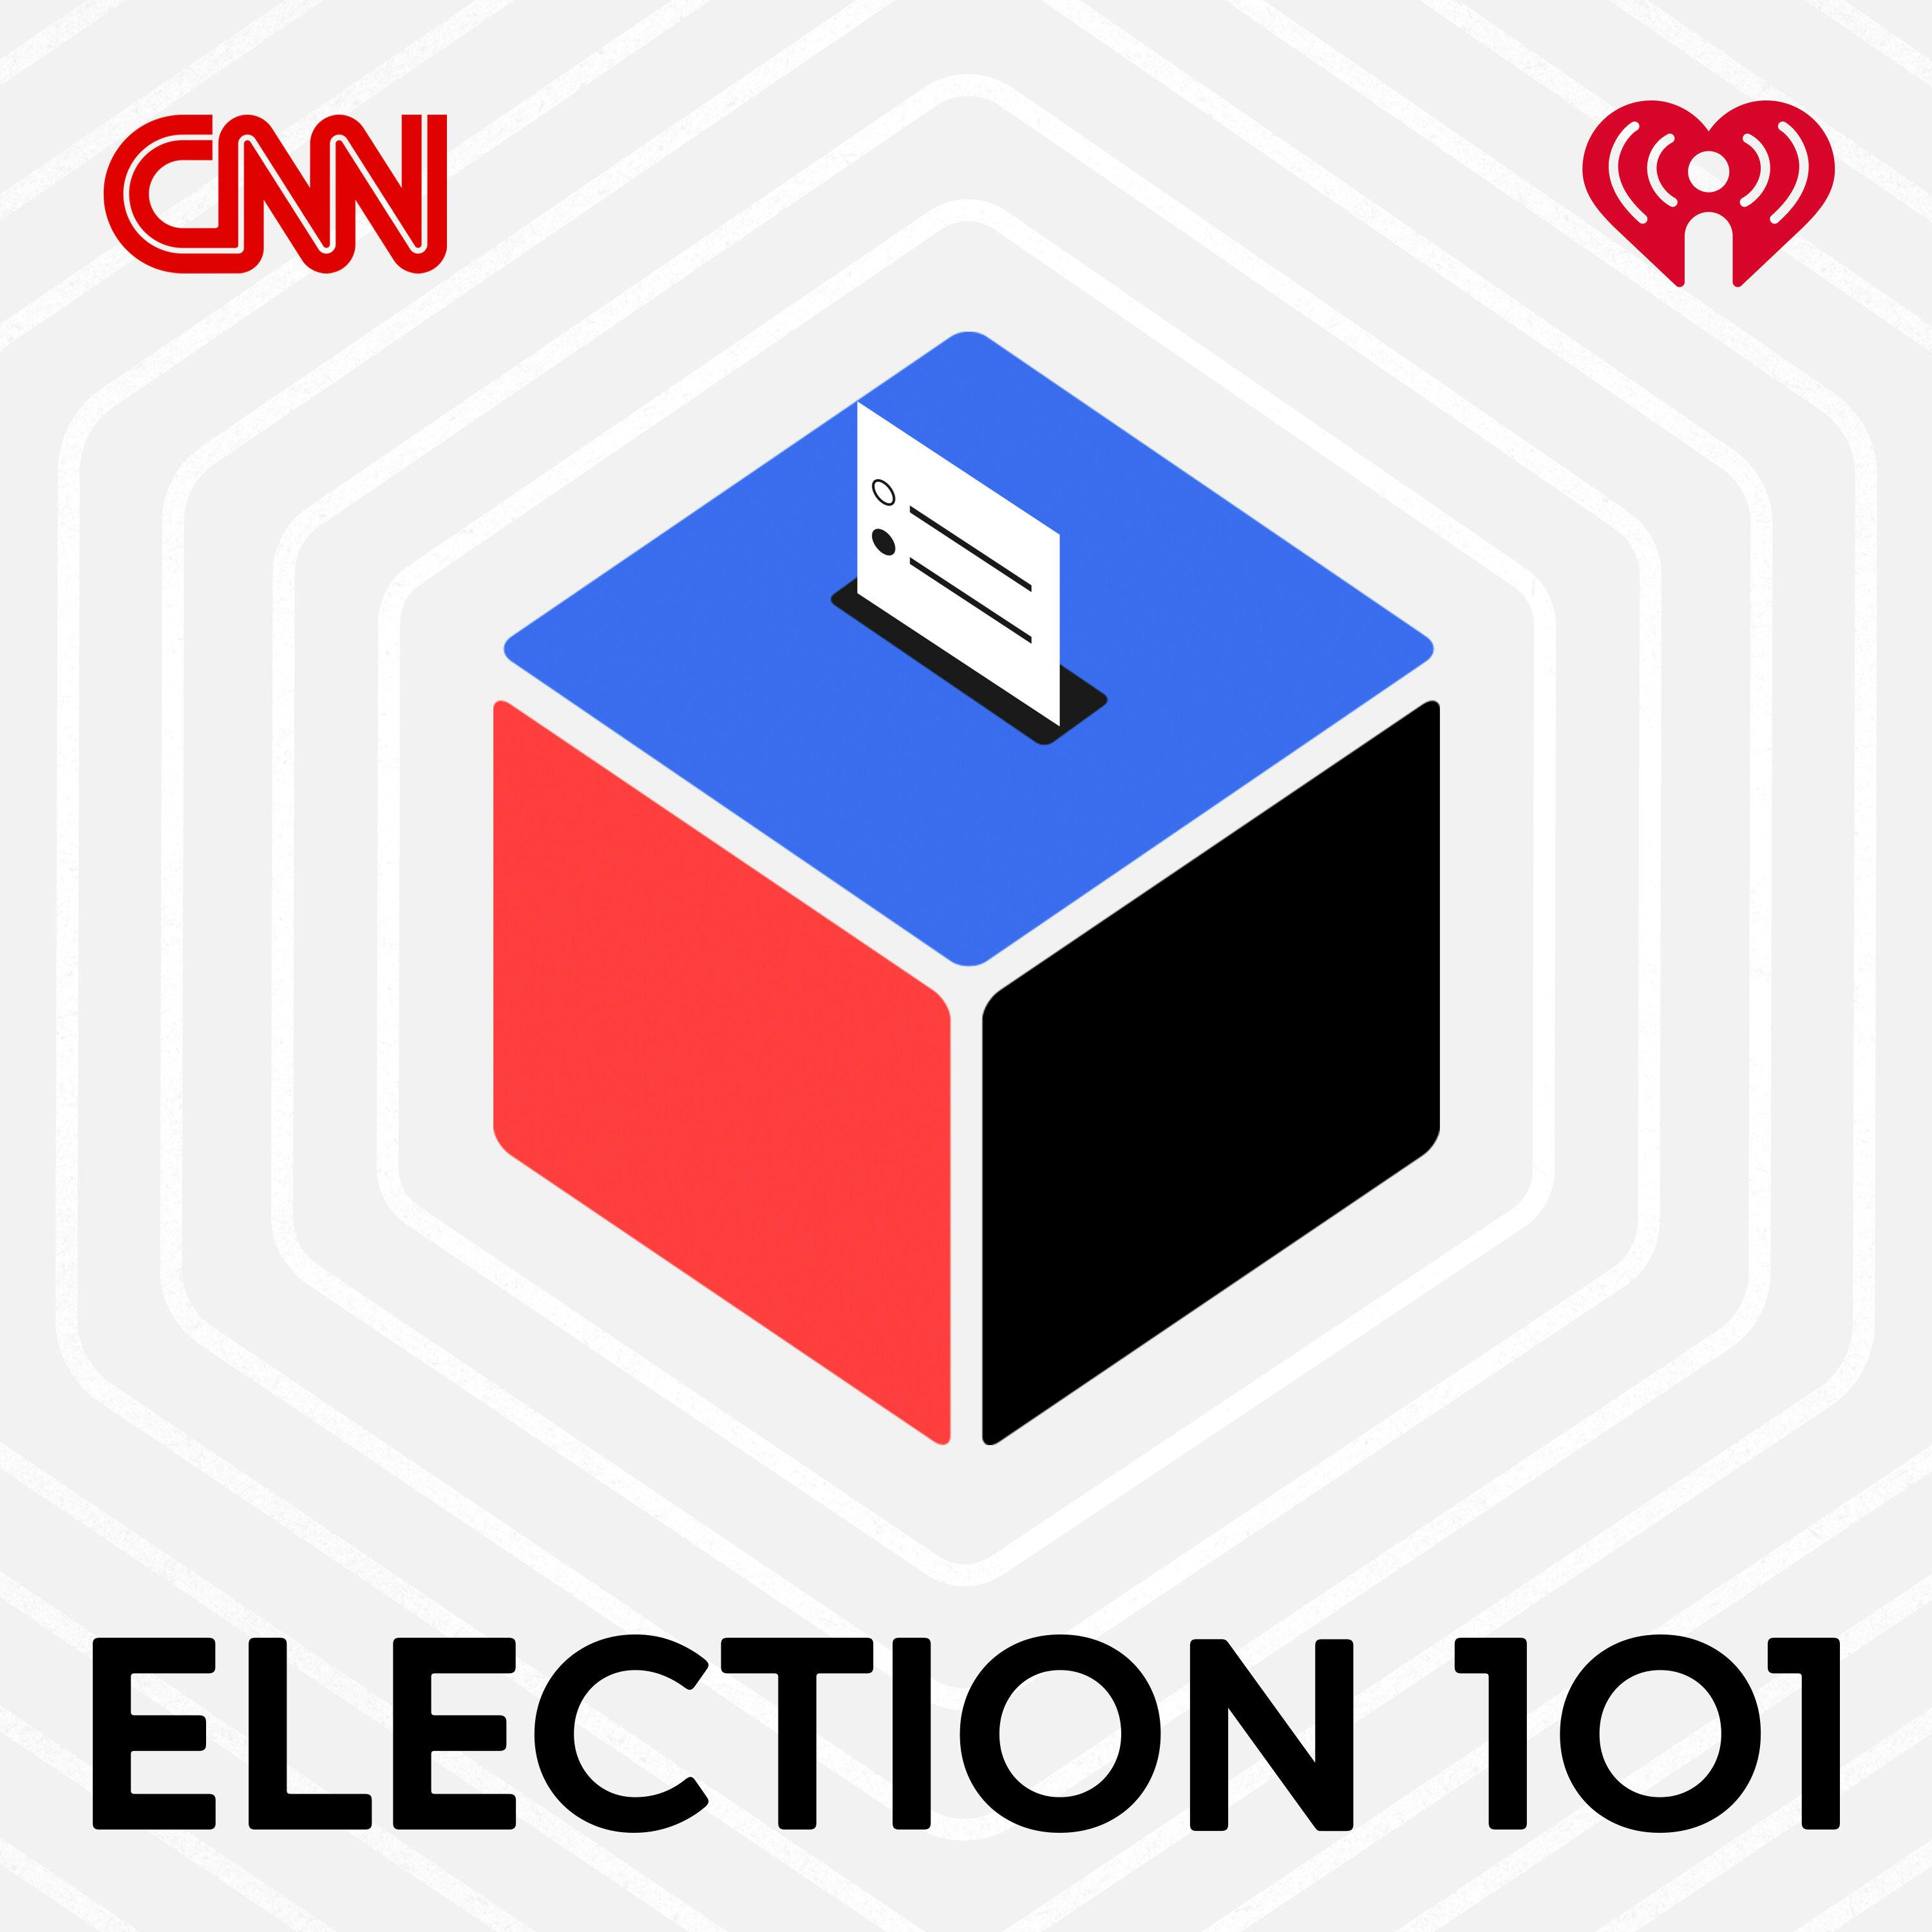 Introducing: Election 101